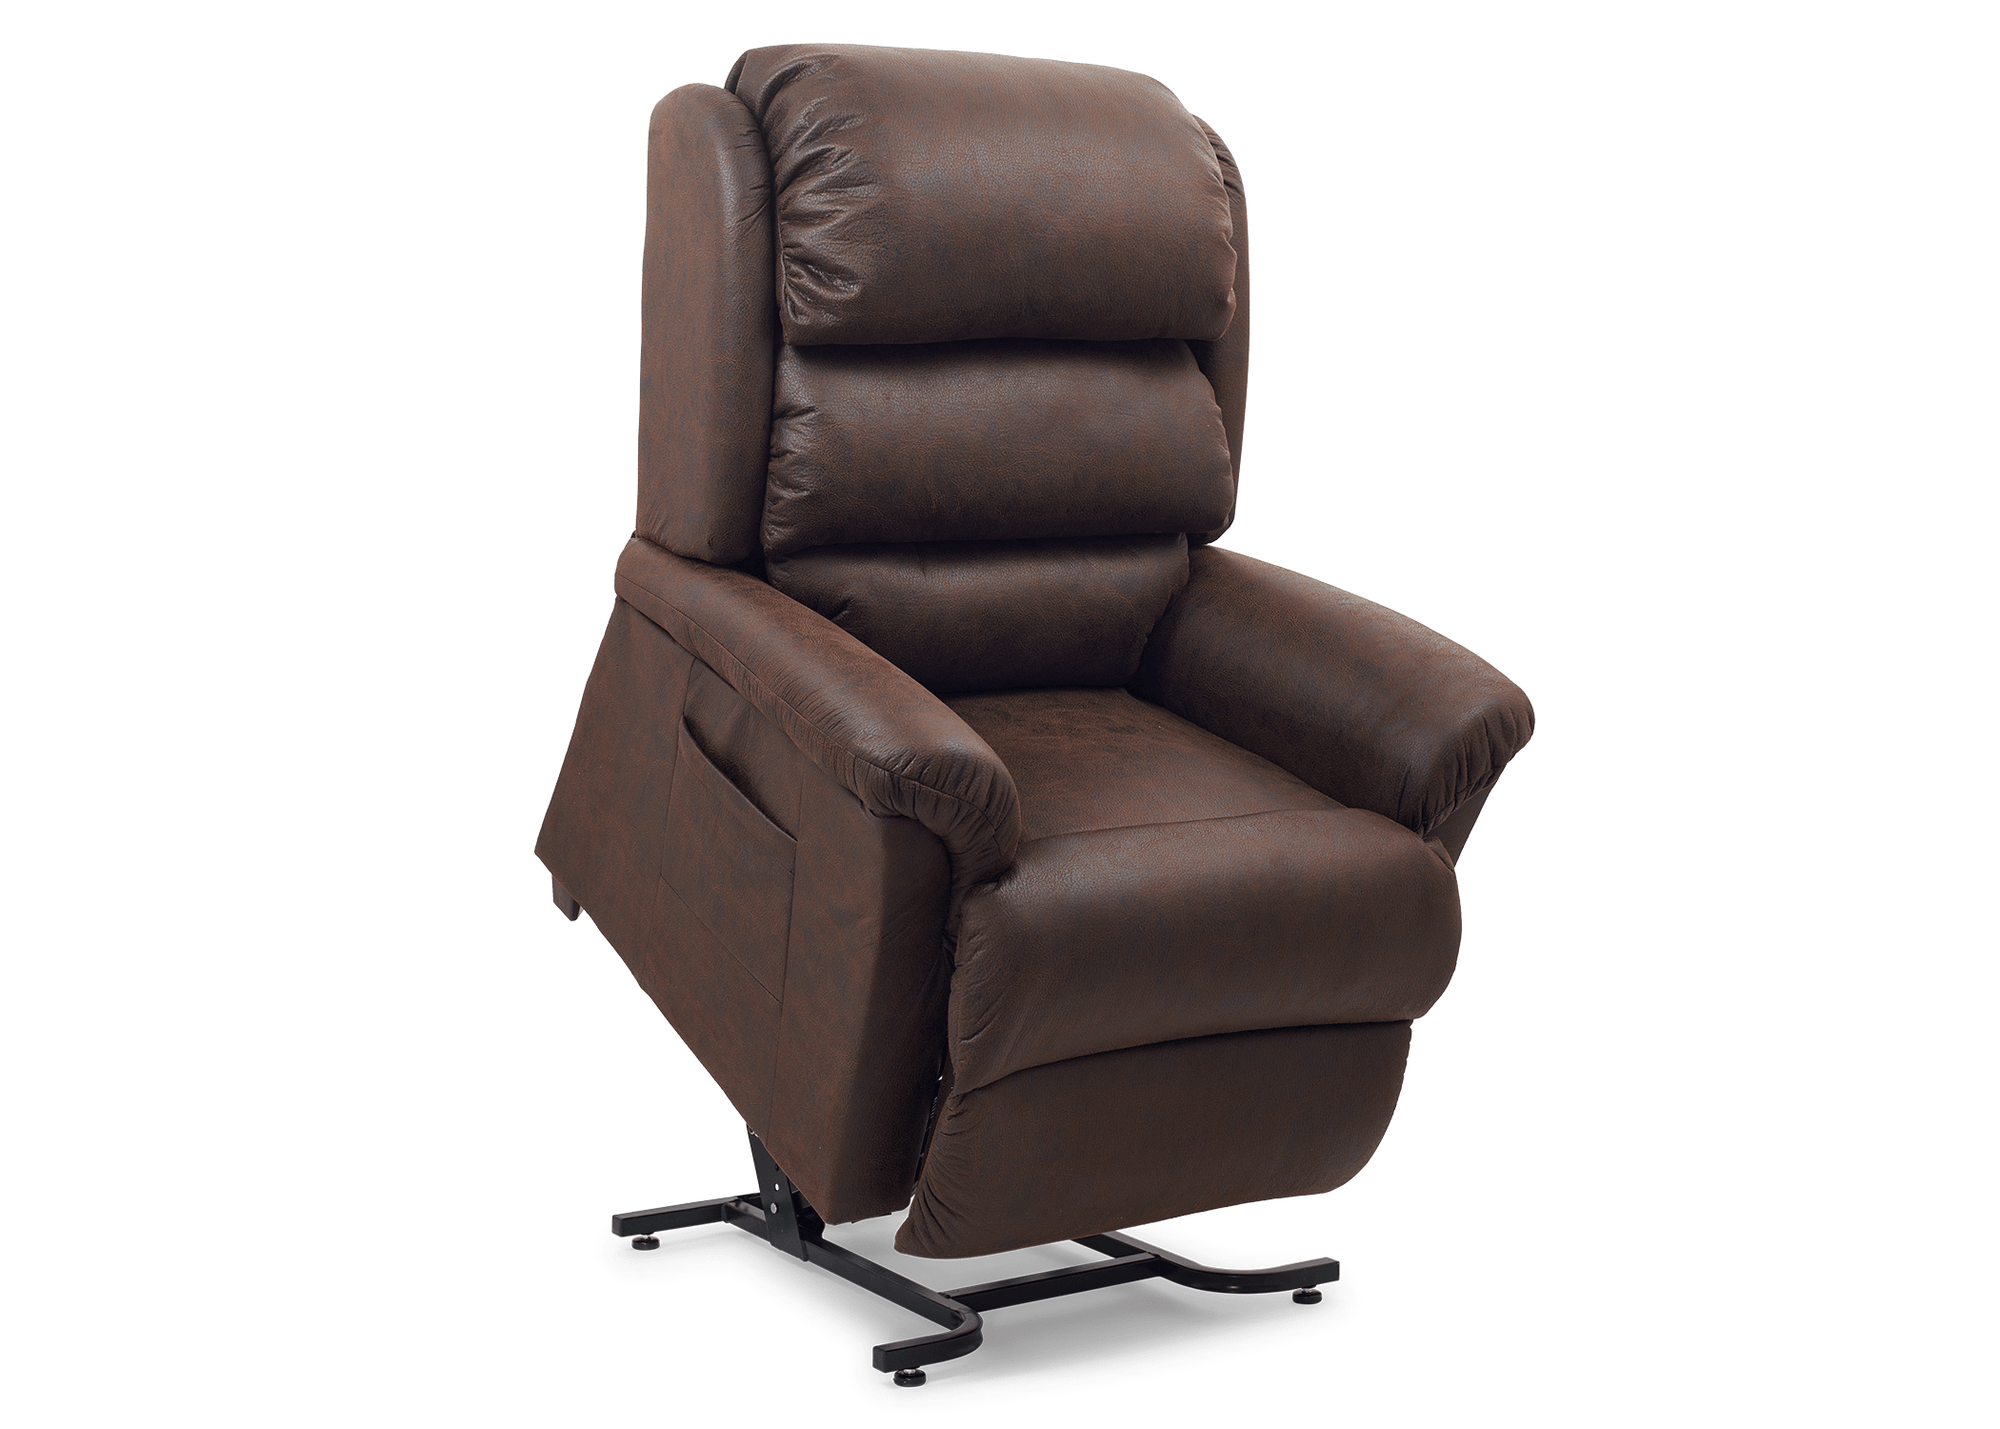 ULTRACOMFORT 3-Position Lift Chair UltraComfort UC549-Small Mira 1 Zone 3 Position Lift Chair